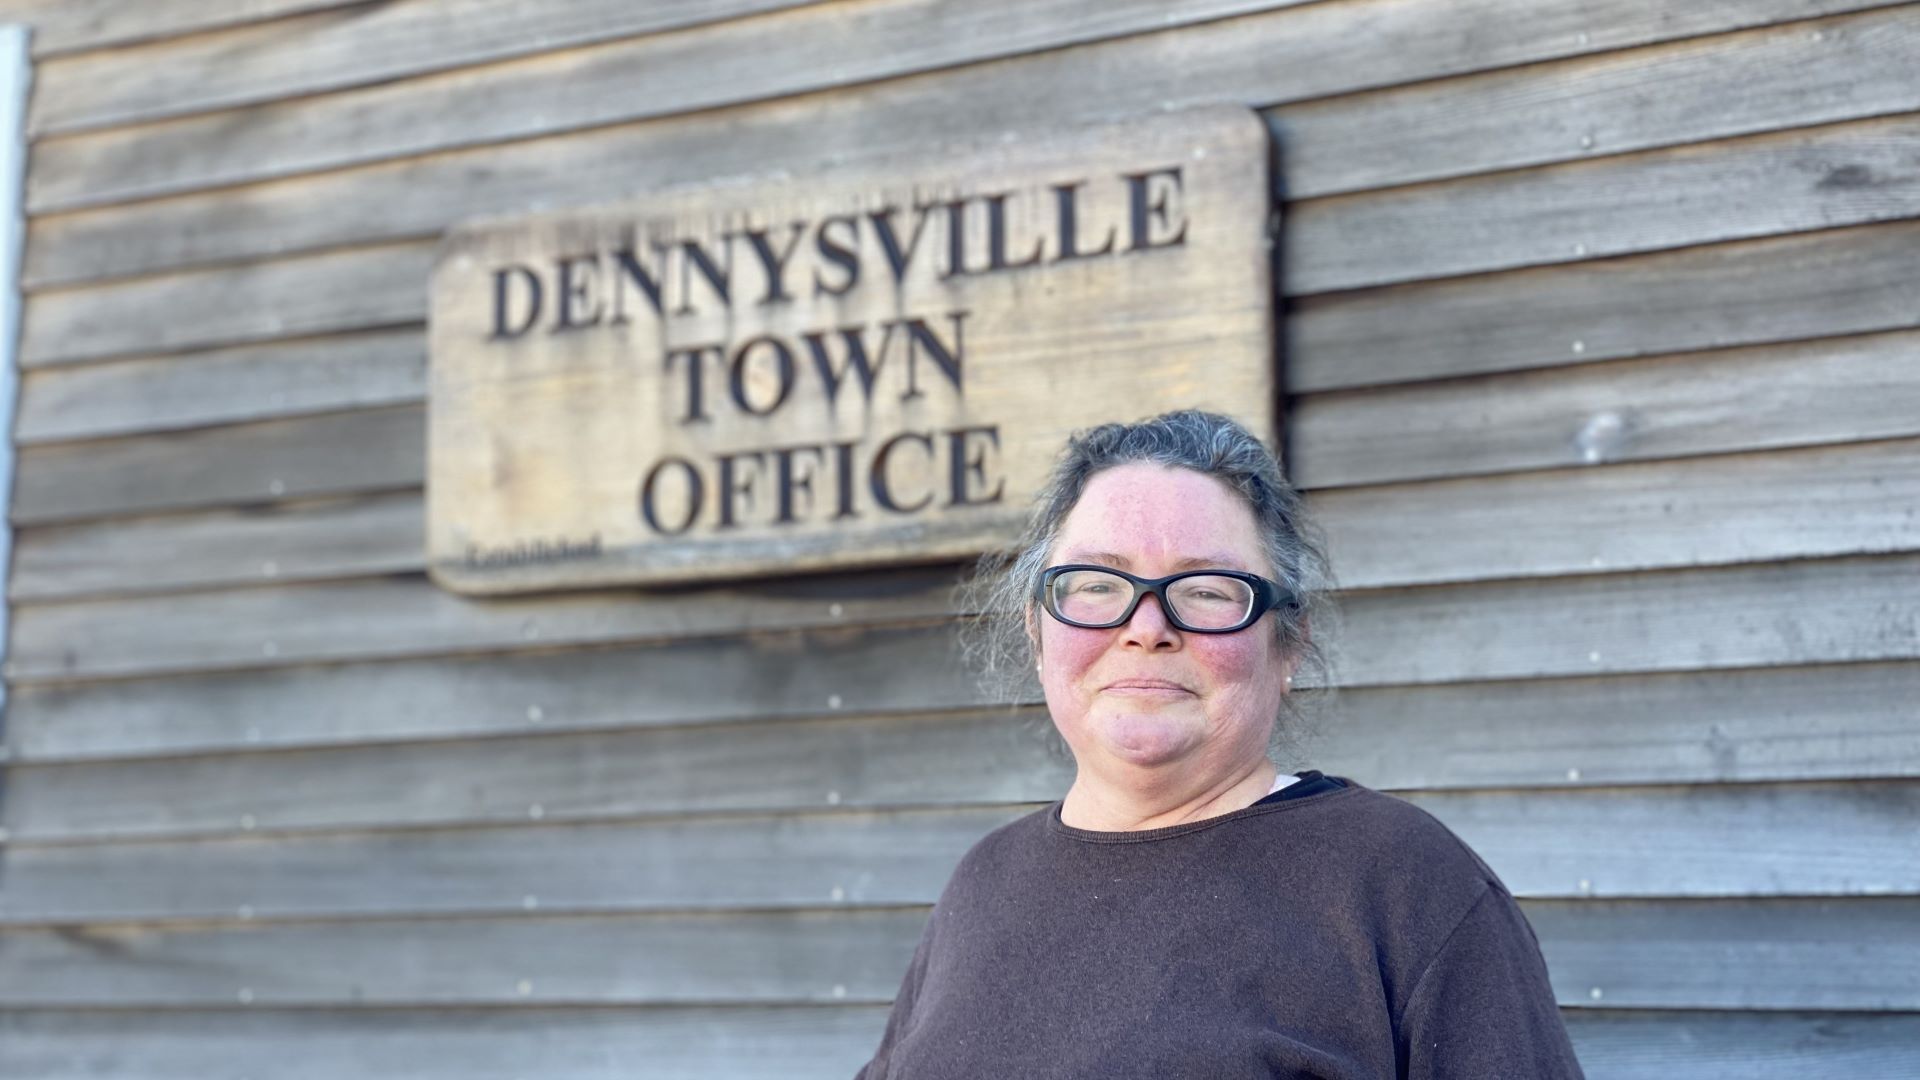 Violet Willis stands in front of a small sign attached to the exterior of the Dennysville town office.